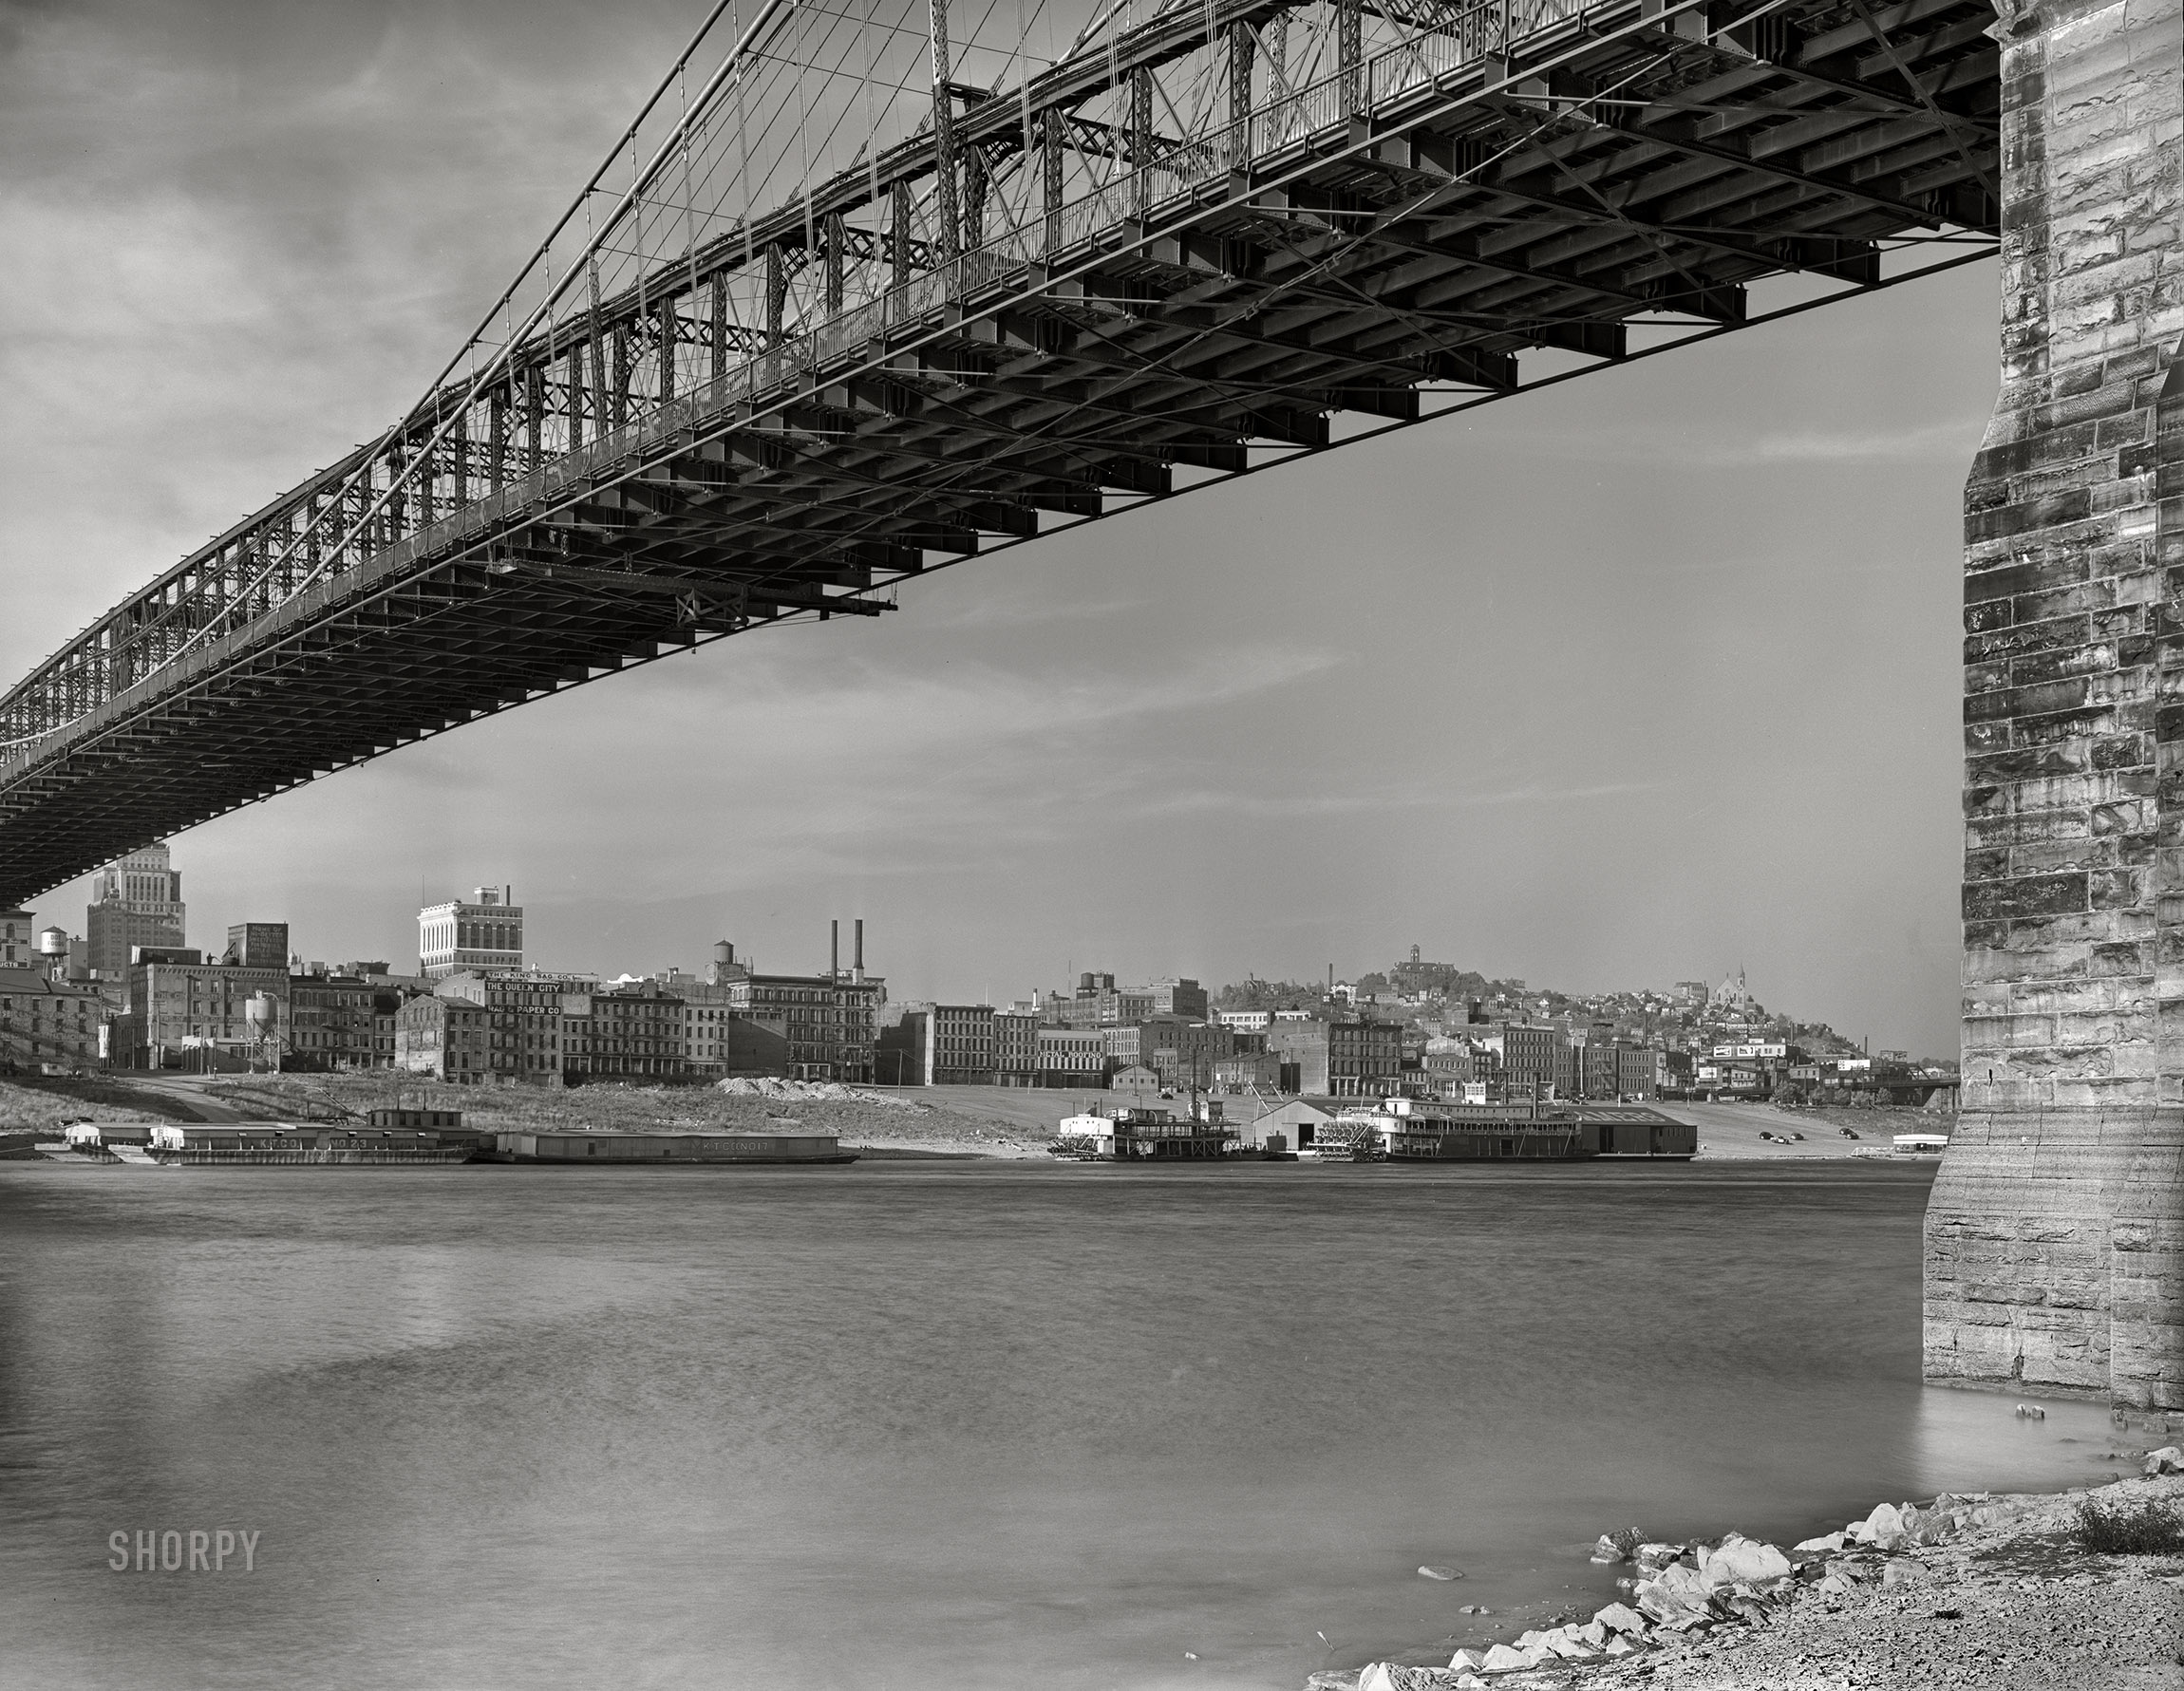 Spring 1941. "View under Roebling Suspension Bridge of Cincinnati from Kentucky side of the Ohio River. Waterfront showing numerous business houses: King Bag Company, Queen City Rag & Paper Company and others." 4x5 inch acetate negative for the FSA. View full size.